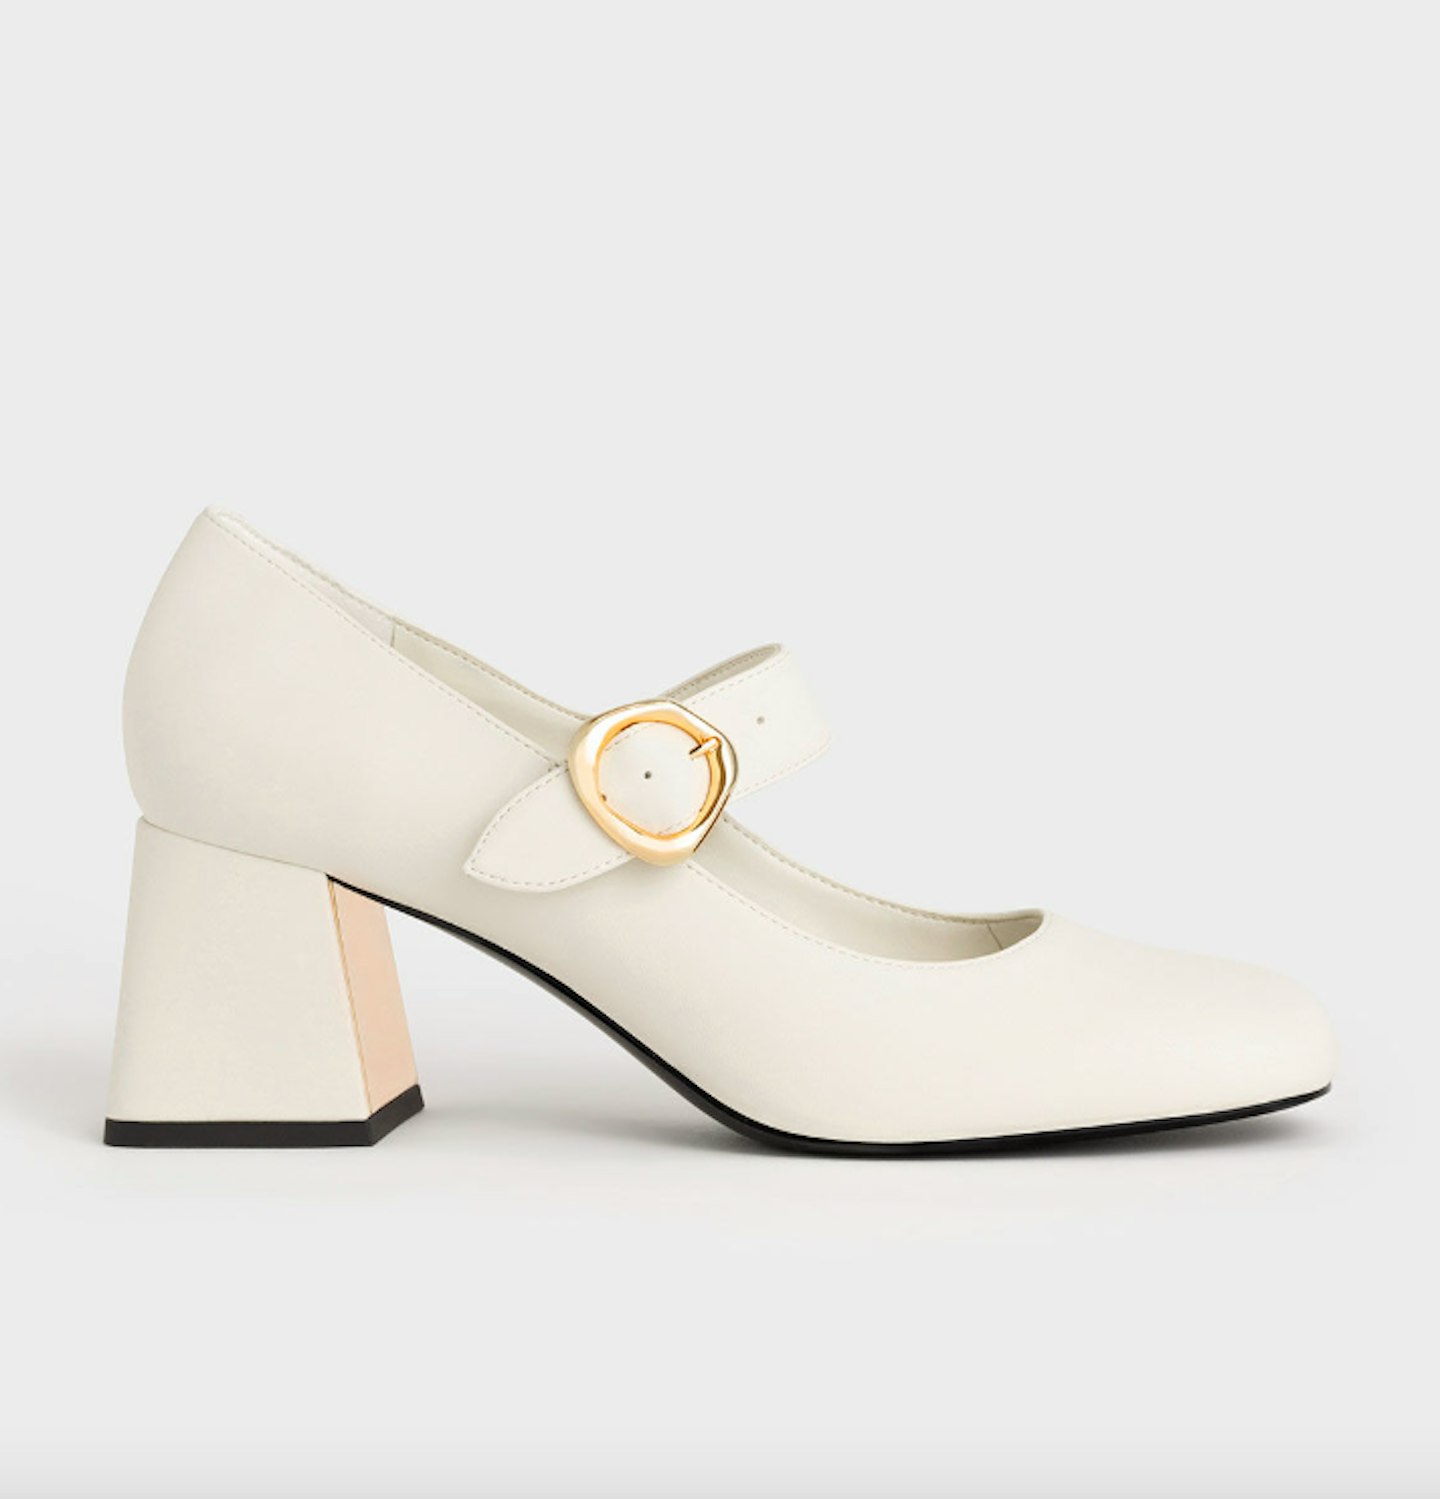 Buckled Mary-Jane Pumps